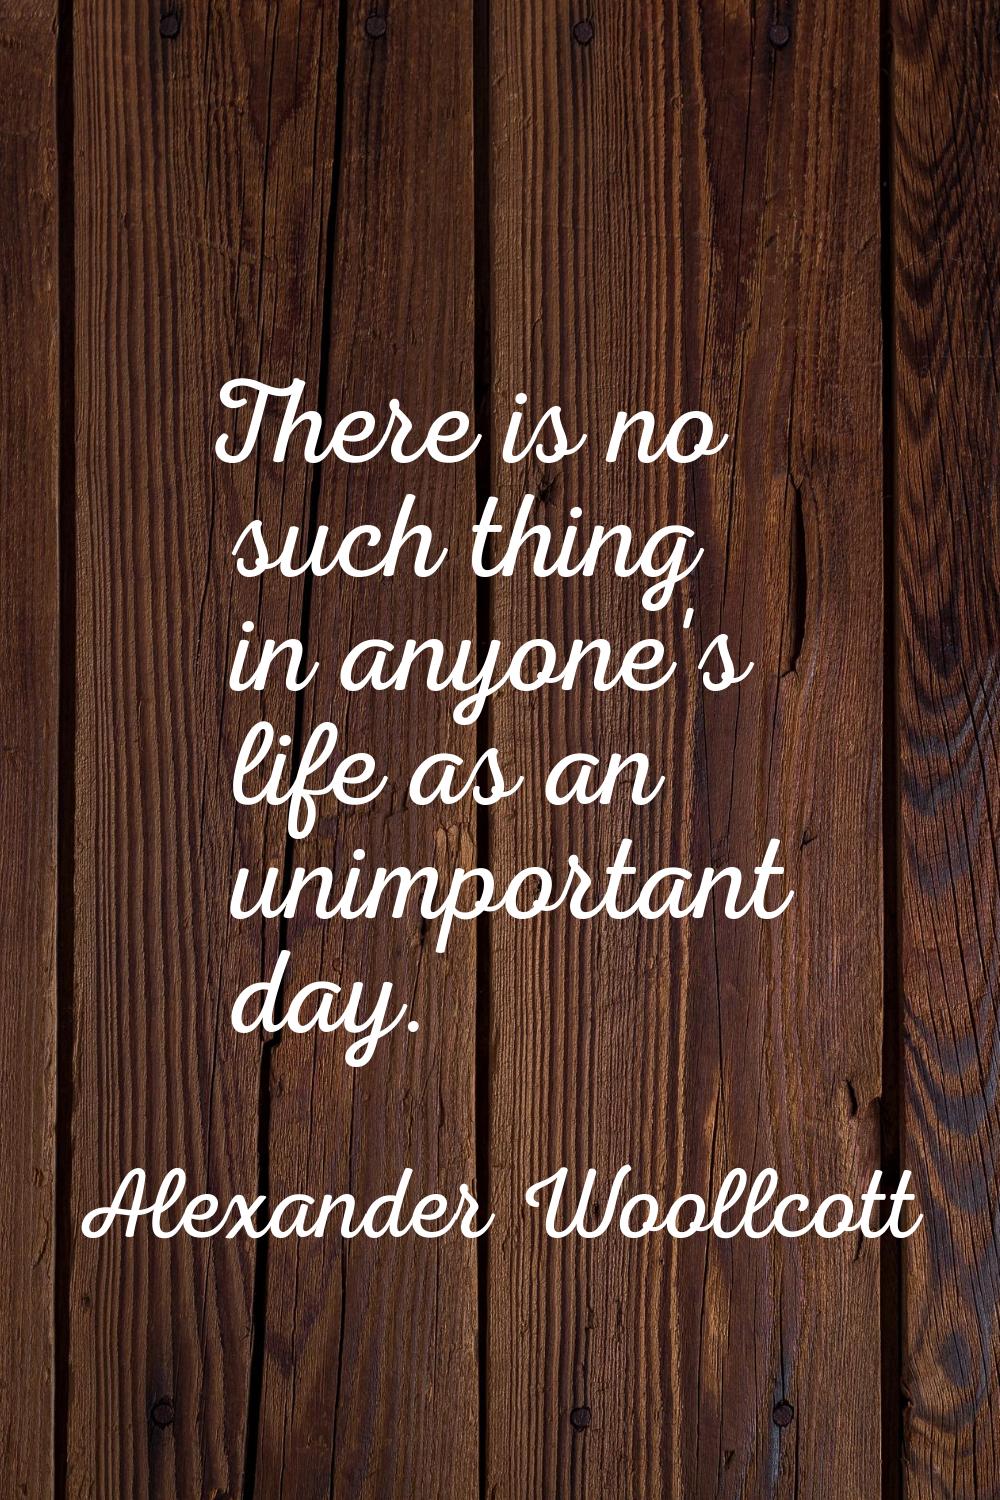 There is no such thing in anyone's life as an unimportant day.